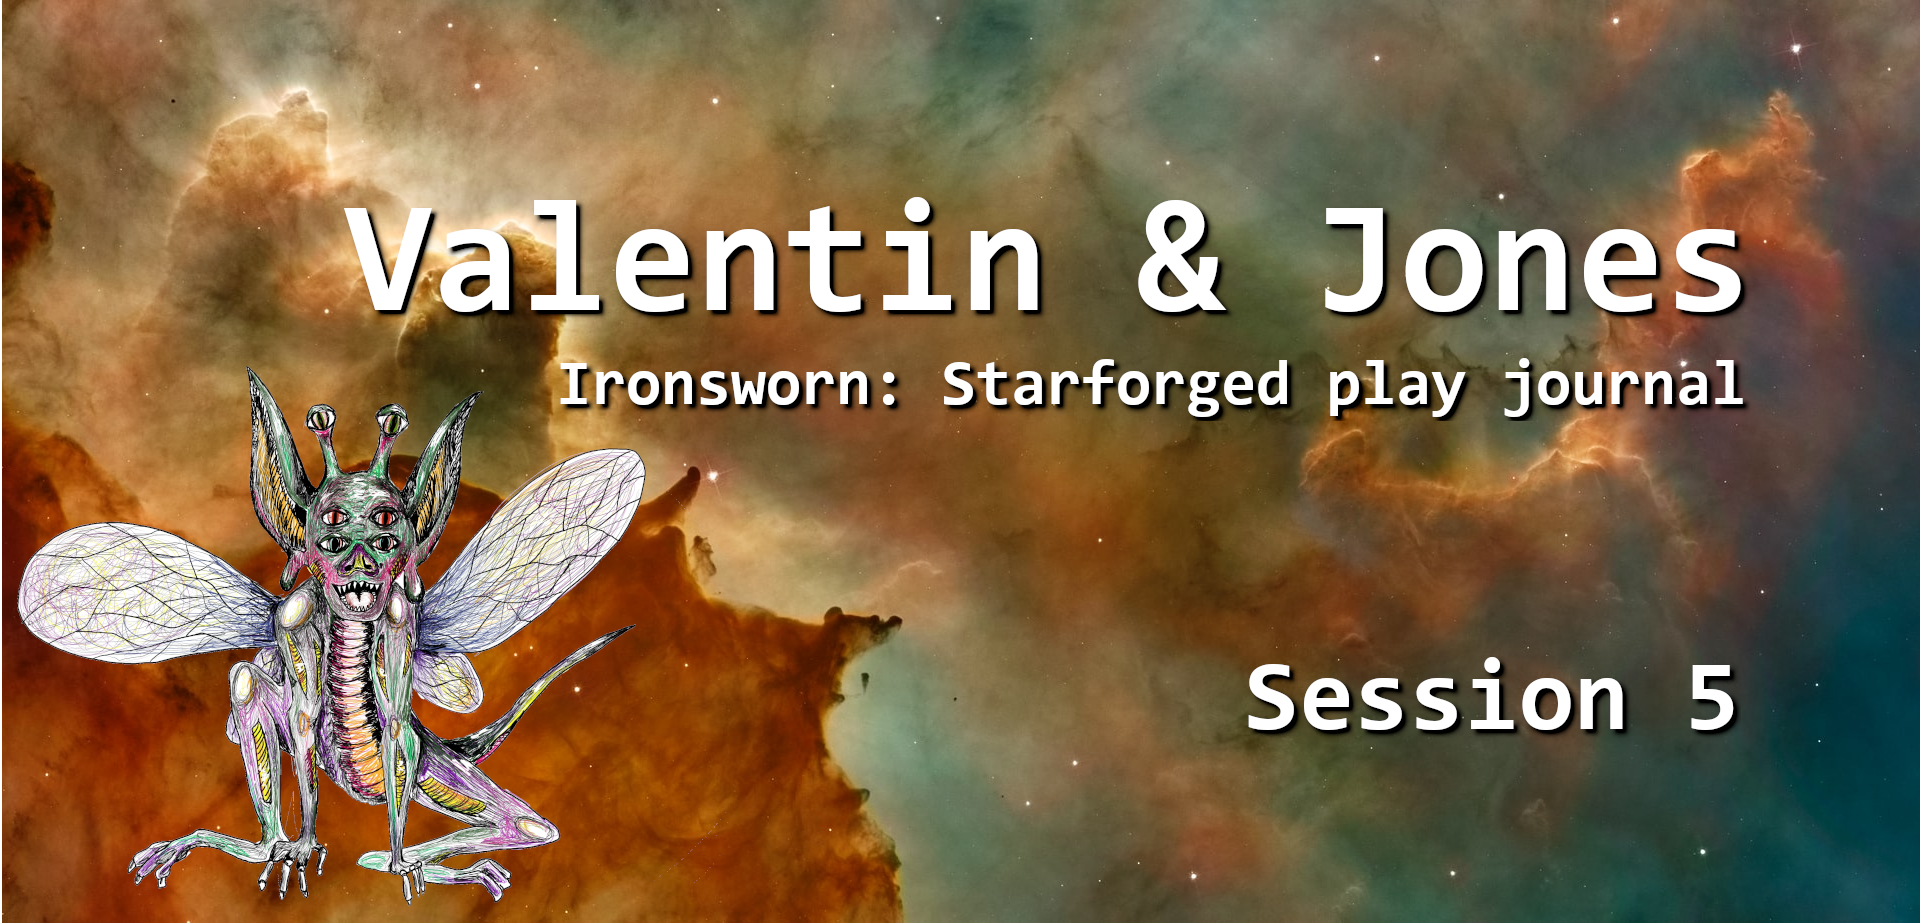 Valentin & Jones, Session 5, Starforged actual play journal